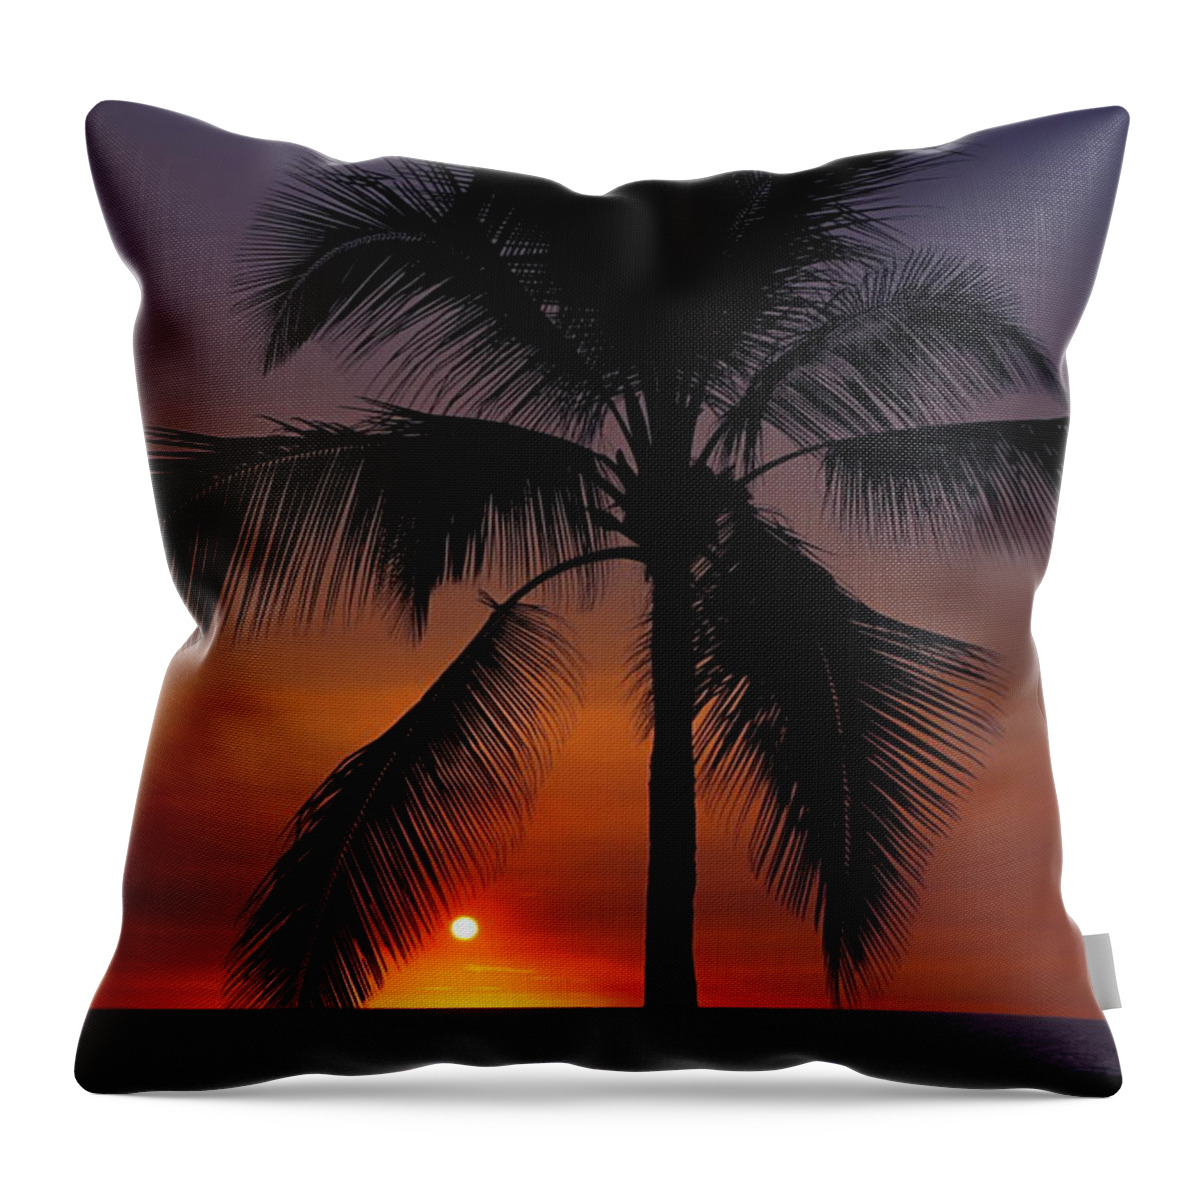 Sunset Throw Pillow featuring the photograph Hawaiian Sunset by Sally Weigand